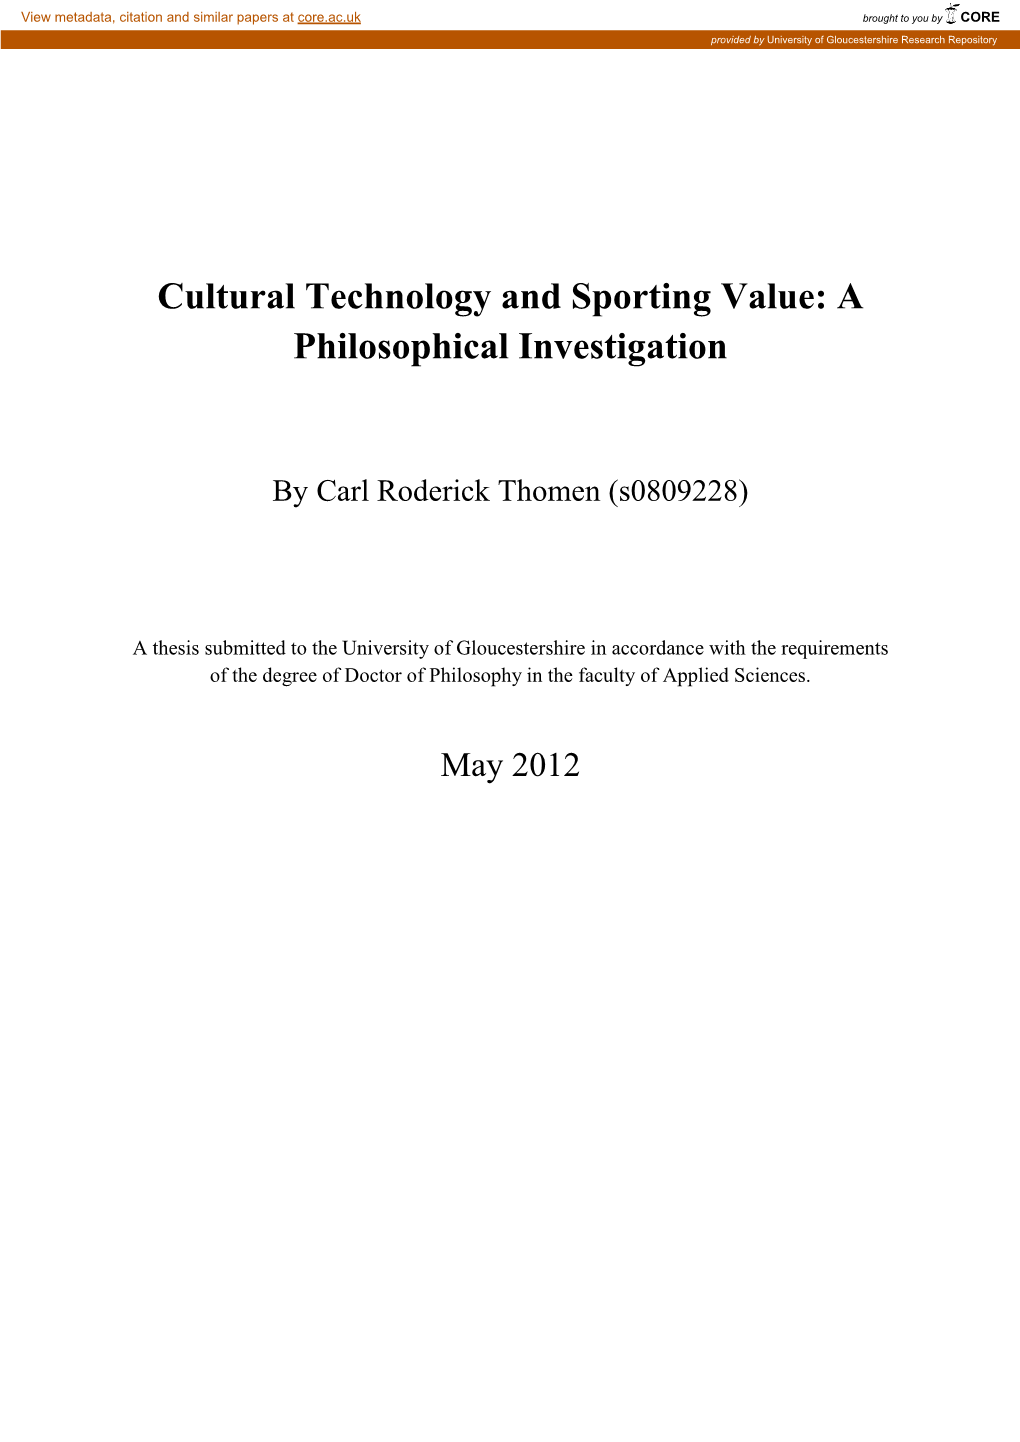 Cultural Technology and Sporting Value: a Philosophical Investigation